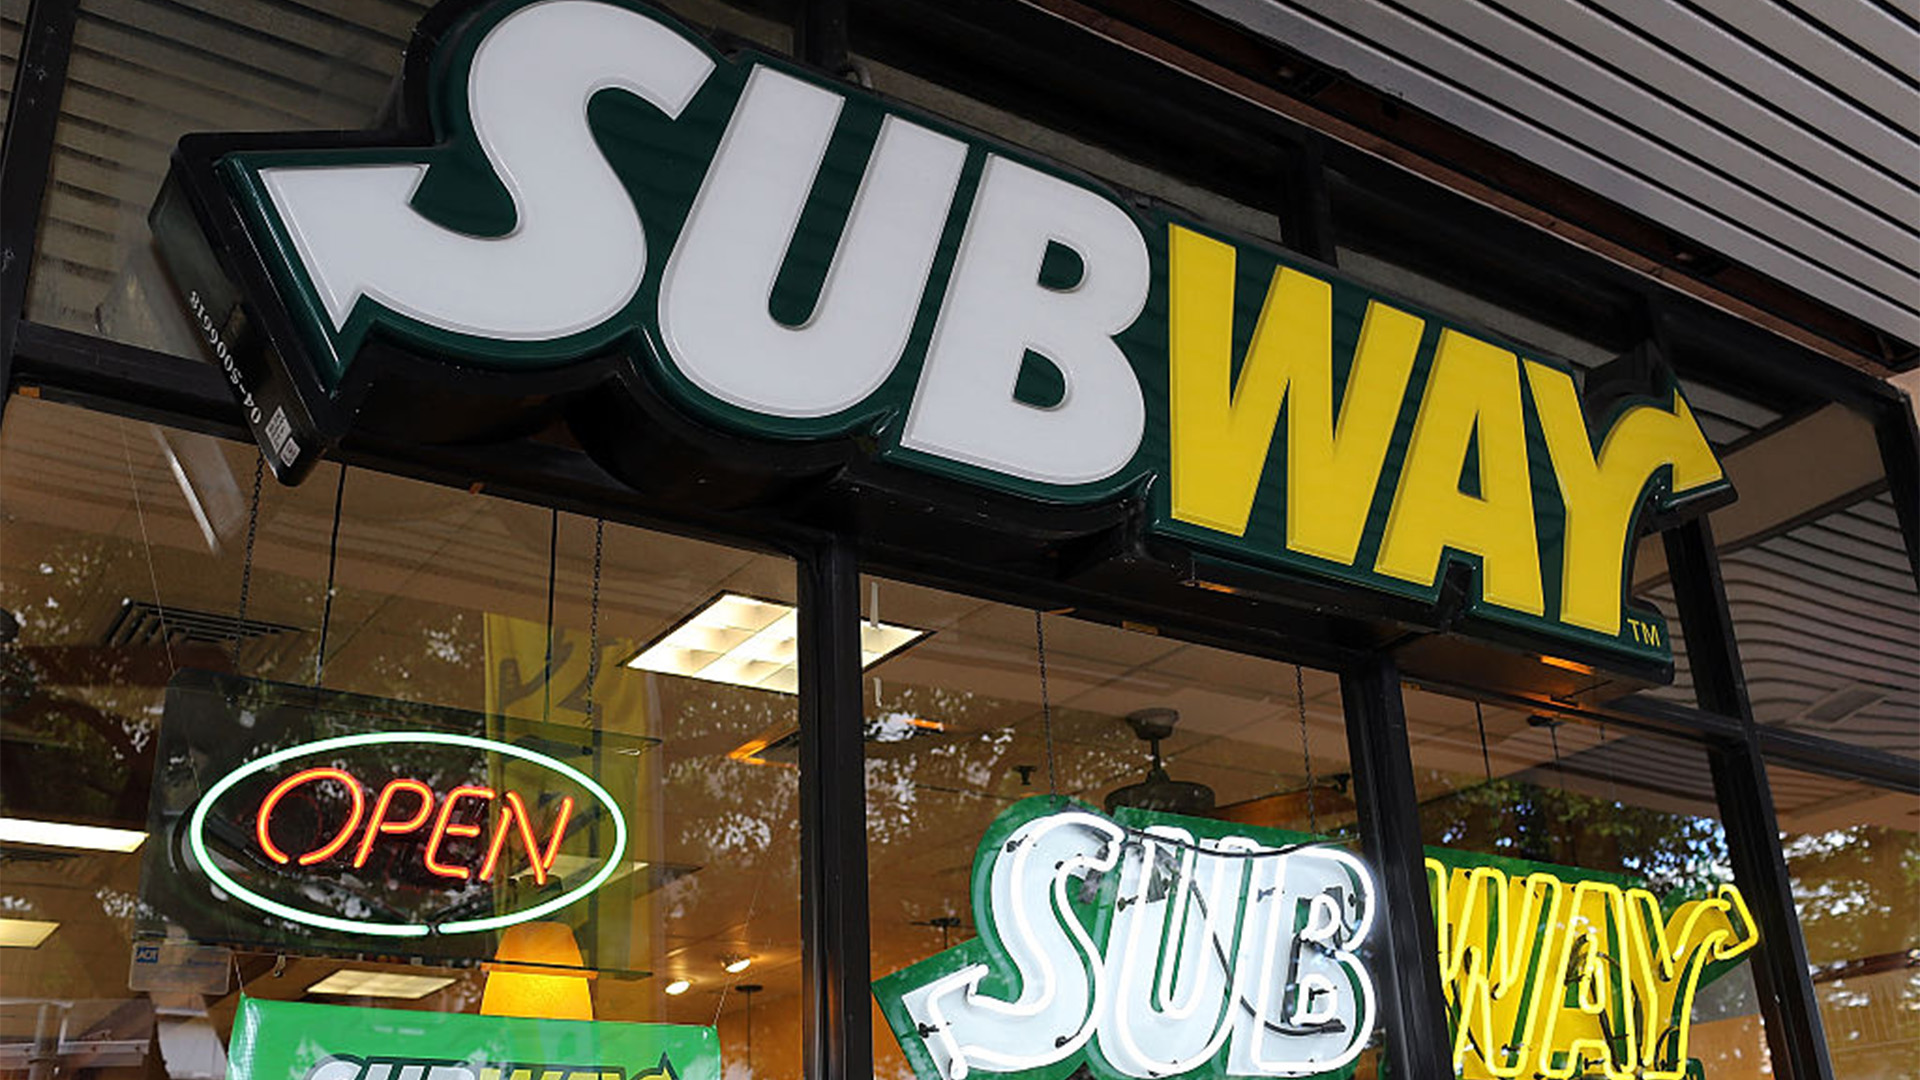 26-Year-Old Tyra Ivory Becomes One Of The Youngest Subway Franchisees In The U.S.